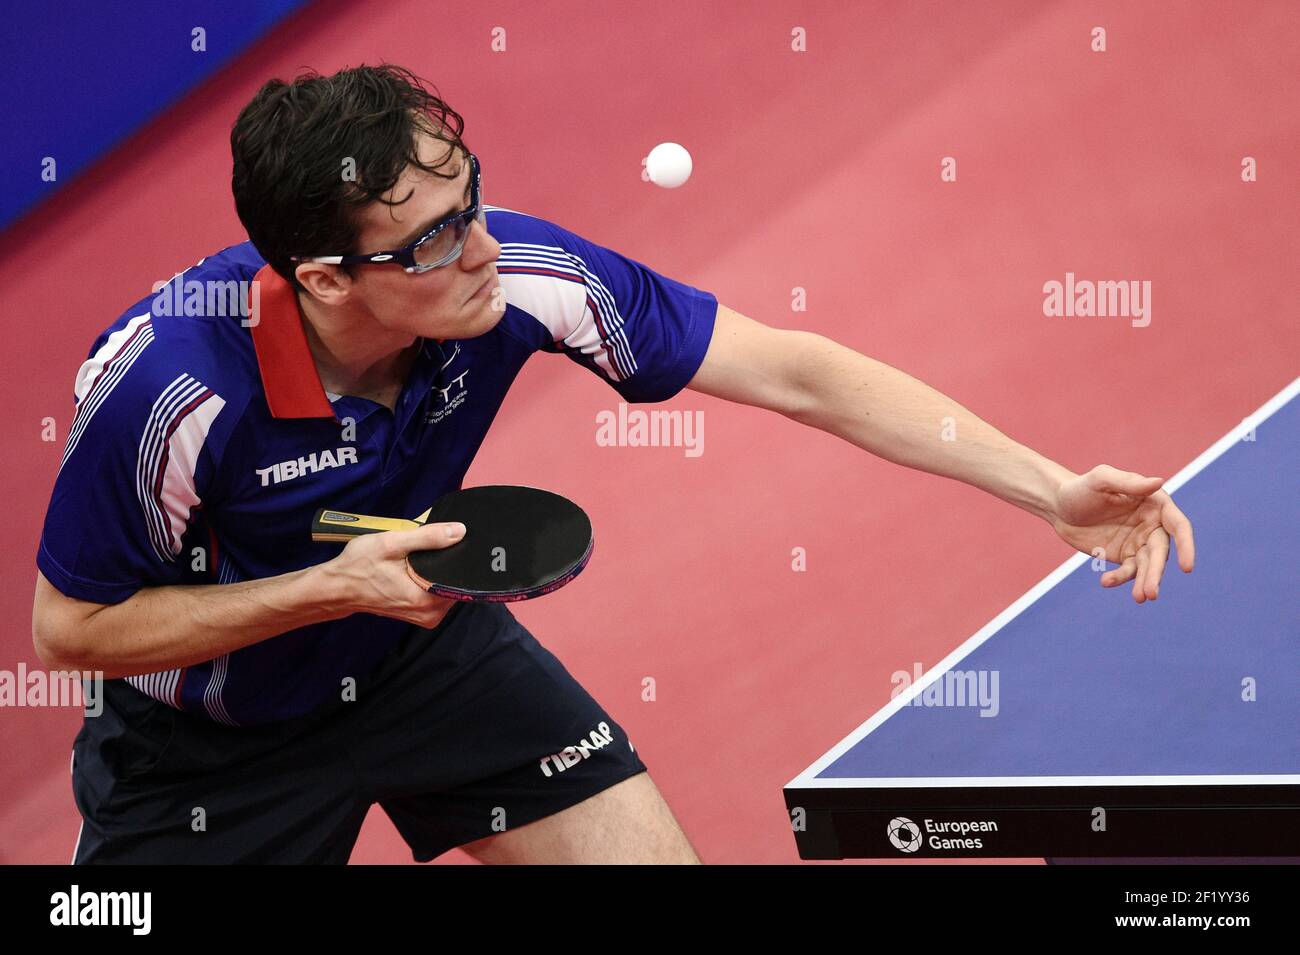 Adrien Mattenet of France competes in Tennis Table Men's Team quarterfinals  during the 1st European Olympic Games 2015 in Baku, Azerbaijan, Day 2, on  June 14, 2015 - Photo Philippe Millereau / KMSP / DPPI Stock Photo - Alamy